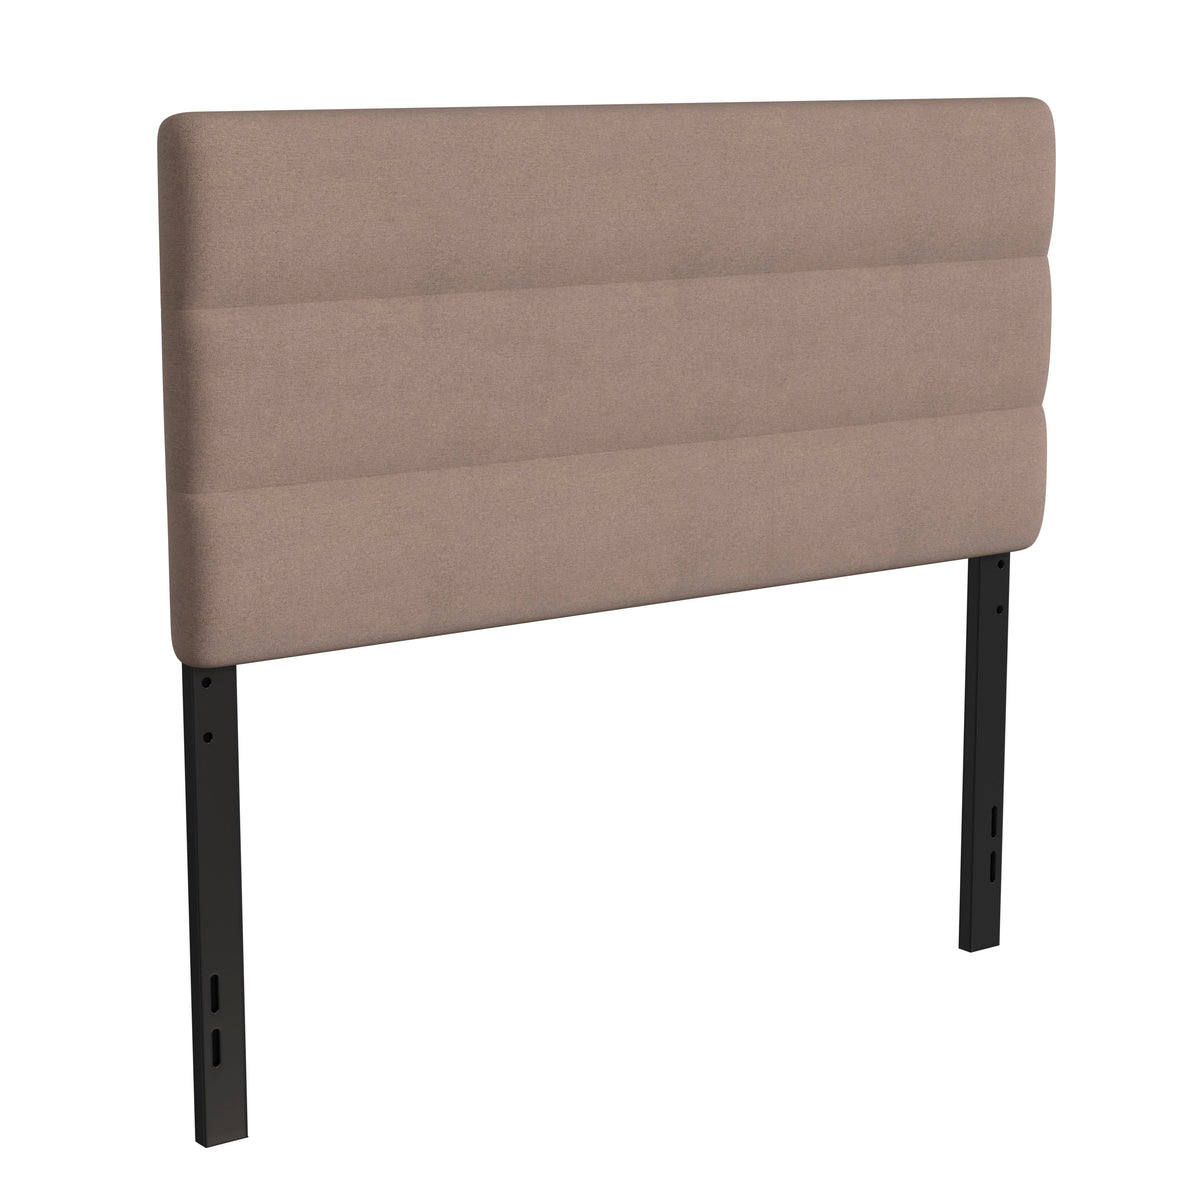 Taupe,Full |#| Universal Fit Tufted Upholstered Headboard in Taupe Fabric - Full